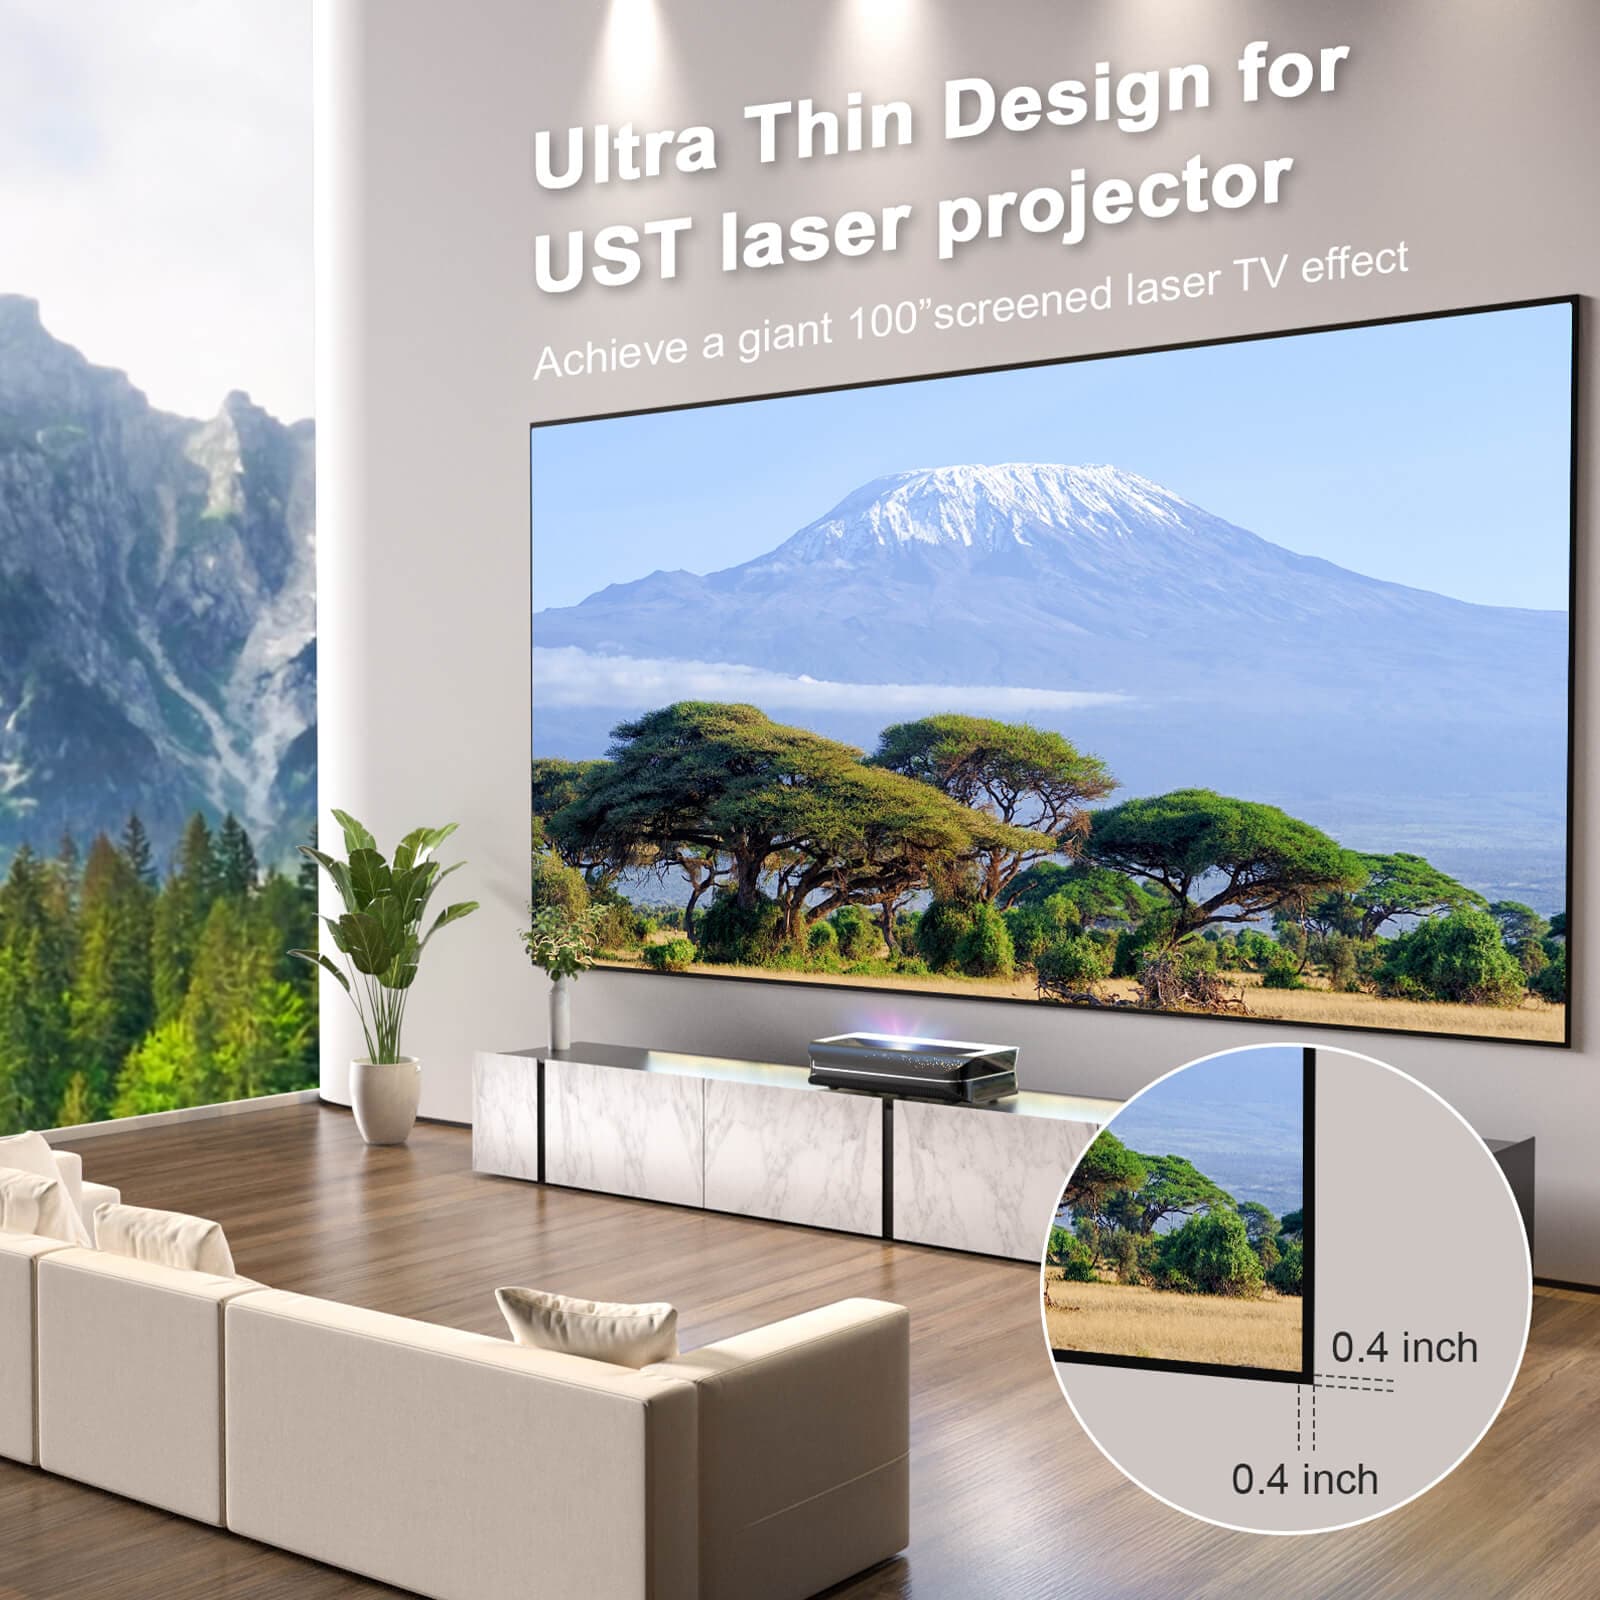 Ultra-thin Daylight ALR screen for laser projectors showing a 100-inch display with a 0.4-inch bezel.